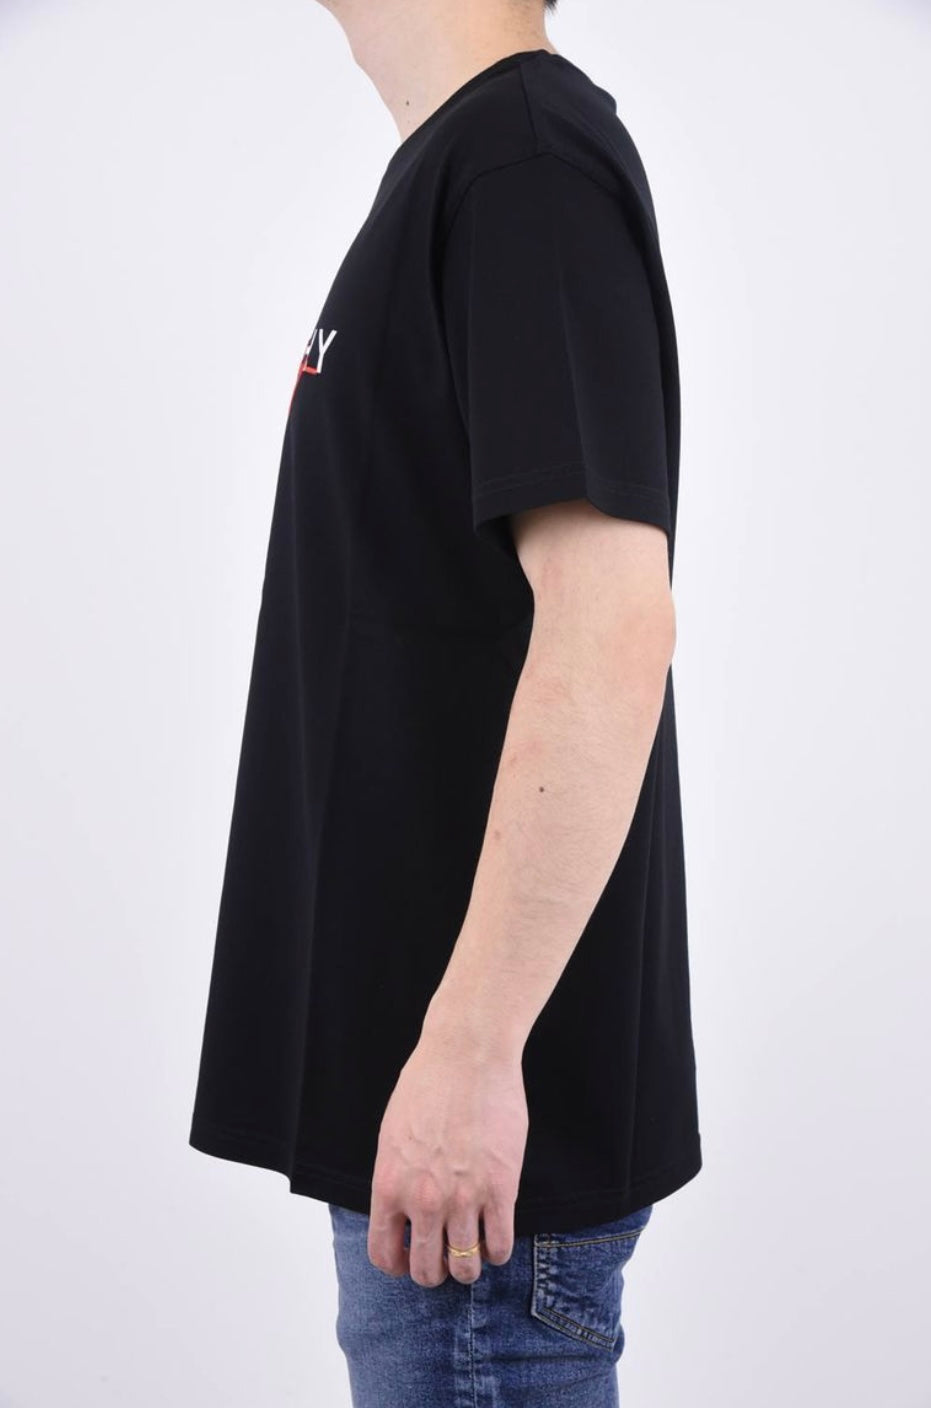 Givenchy Red Embroidery T-Shirt Black Regular Fit | Hype Vault Kuala Lumpur